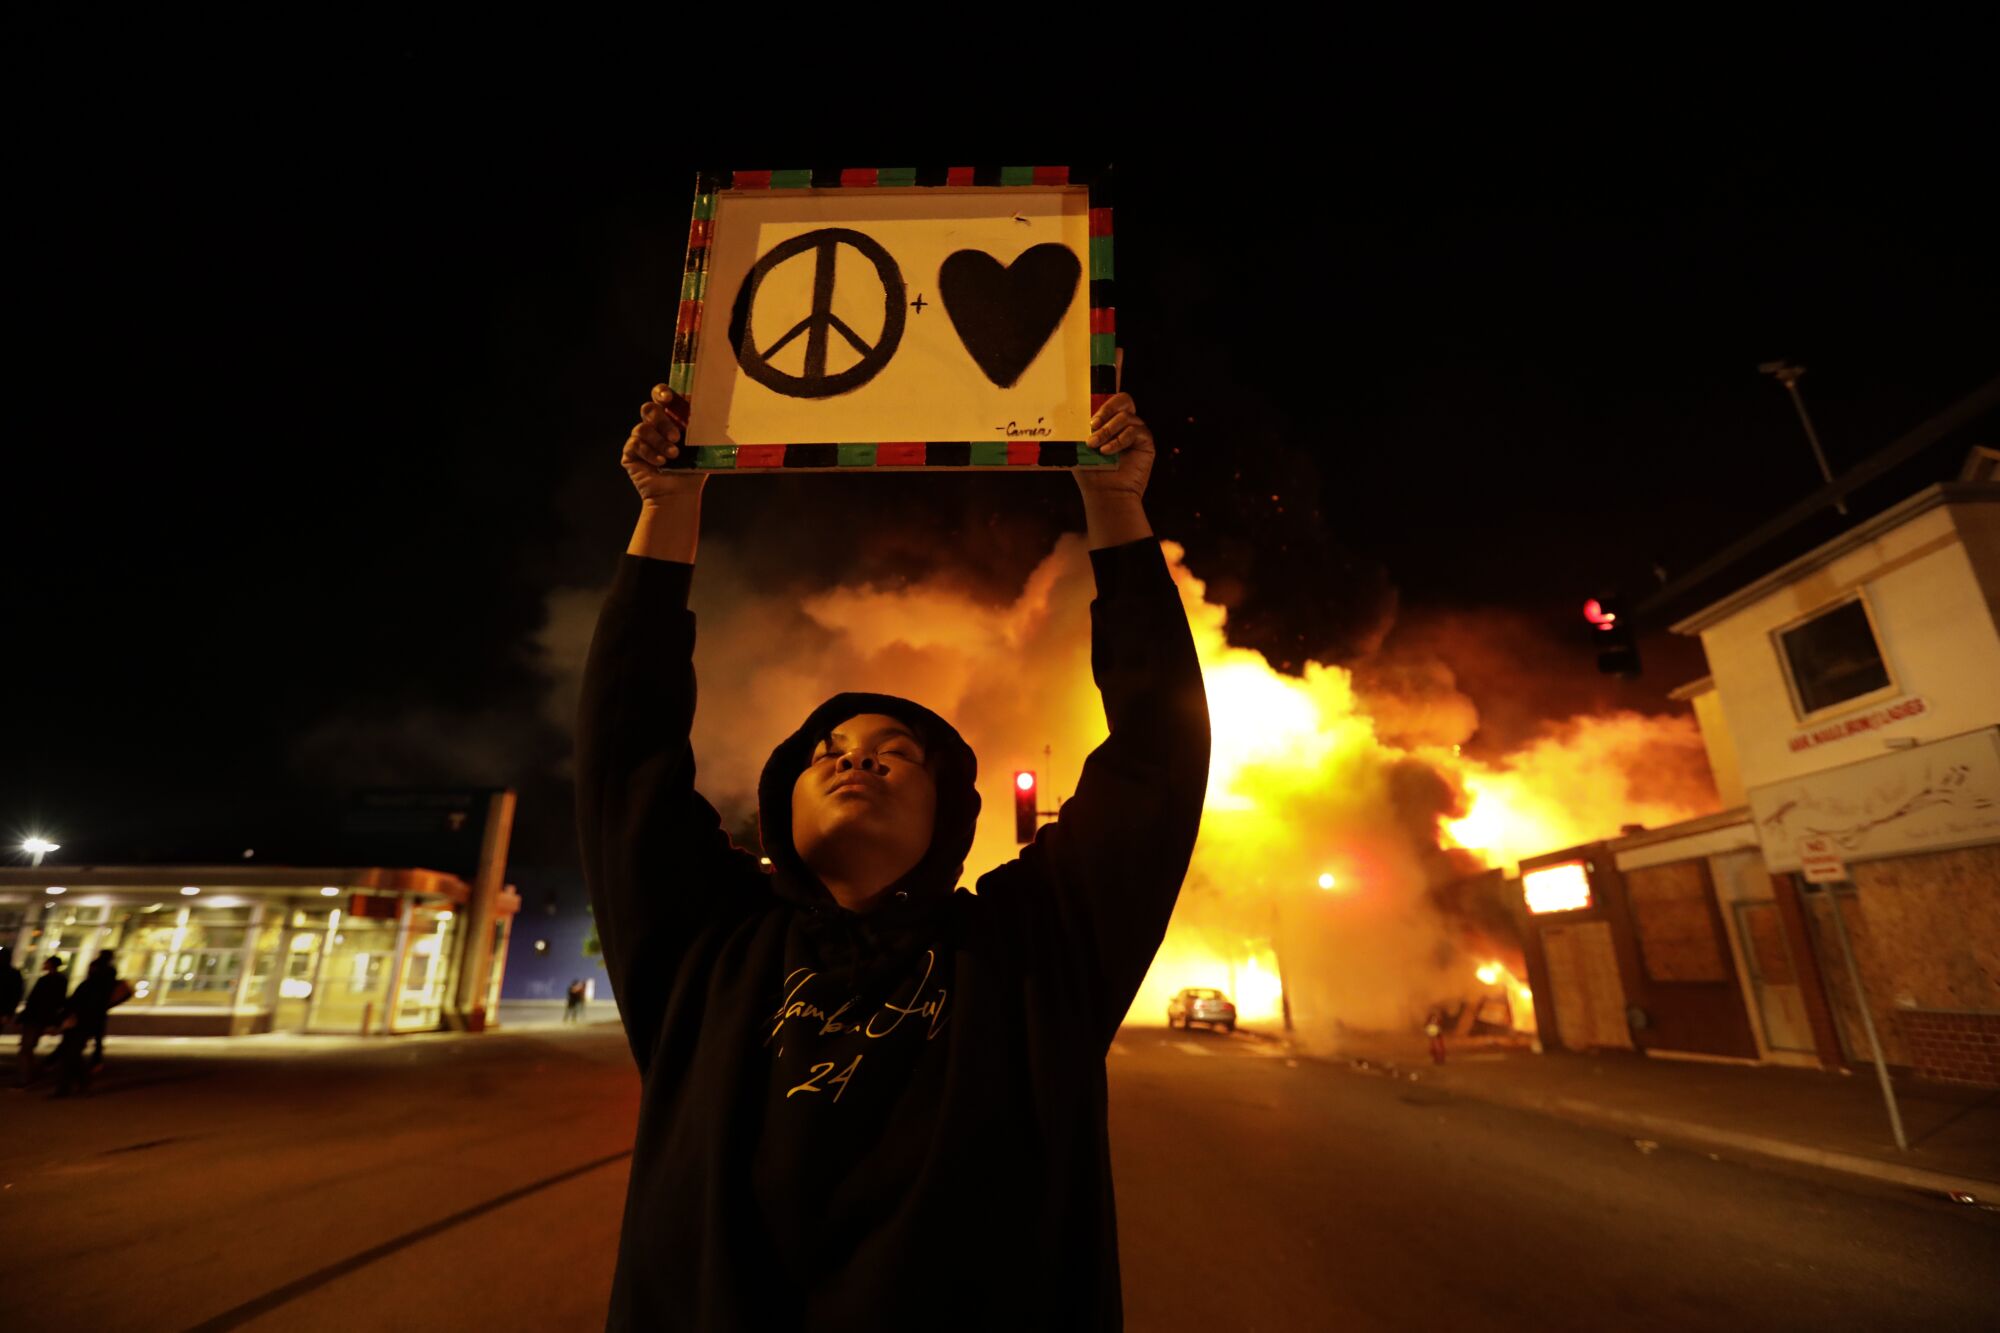 A woman expresses her desire for peace and love in Minneapolis.